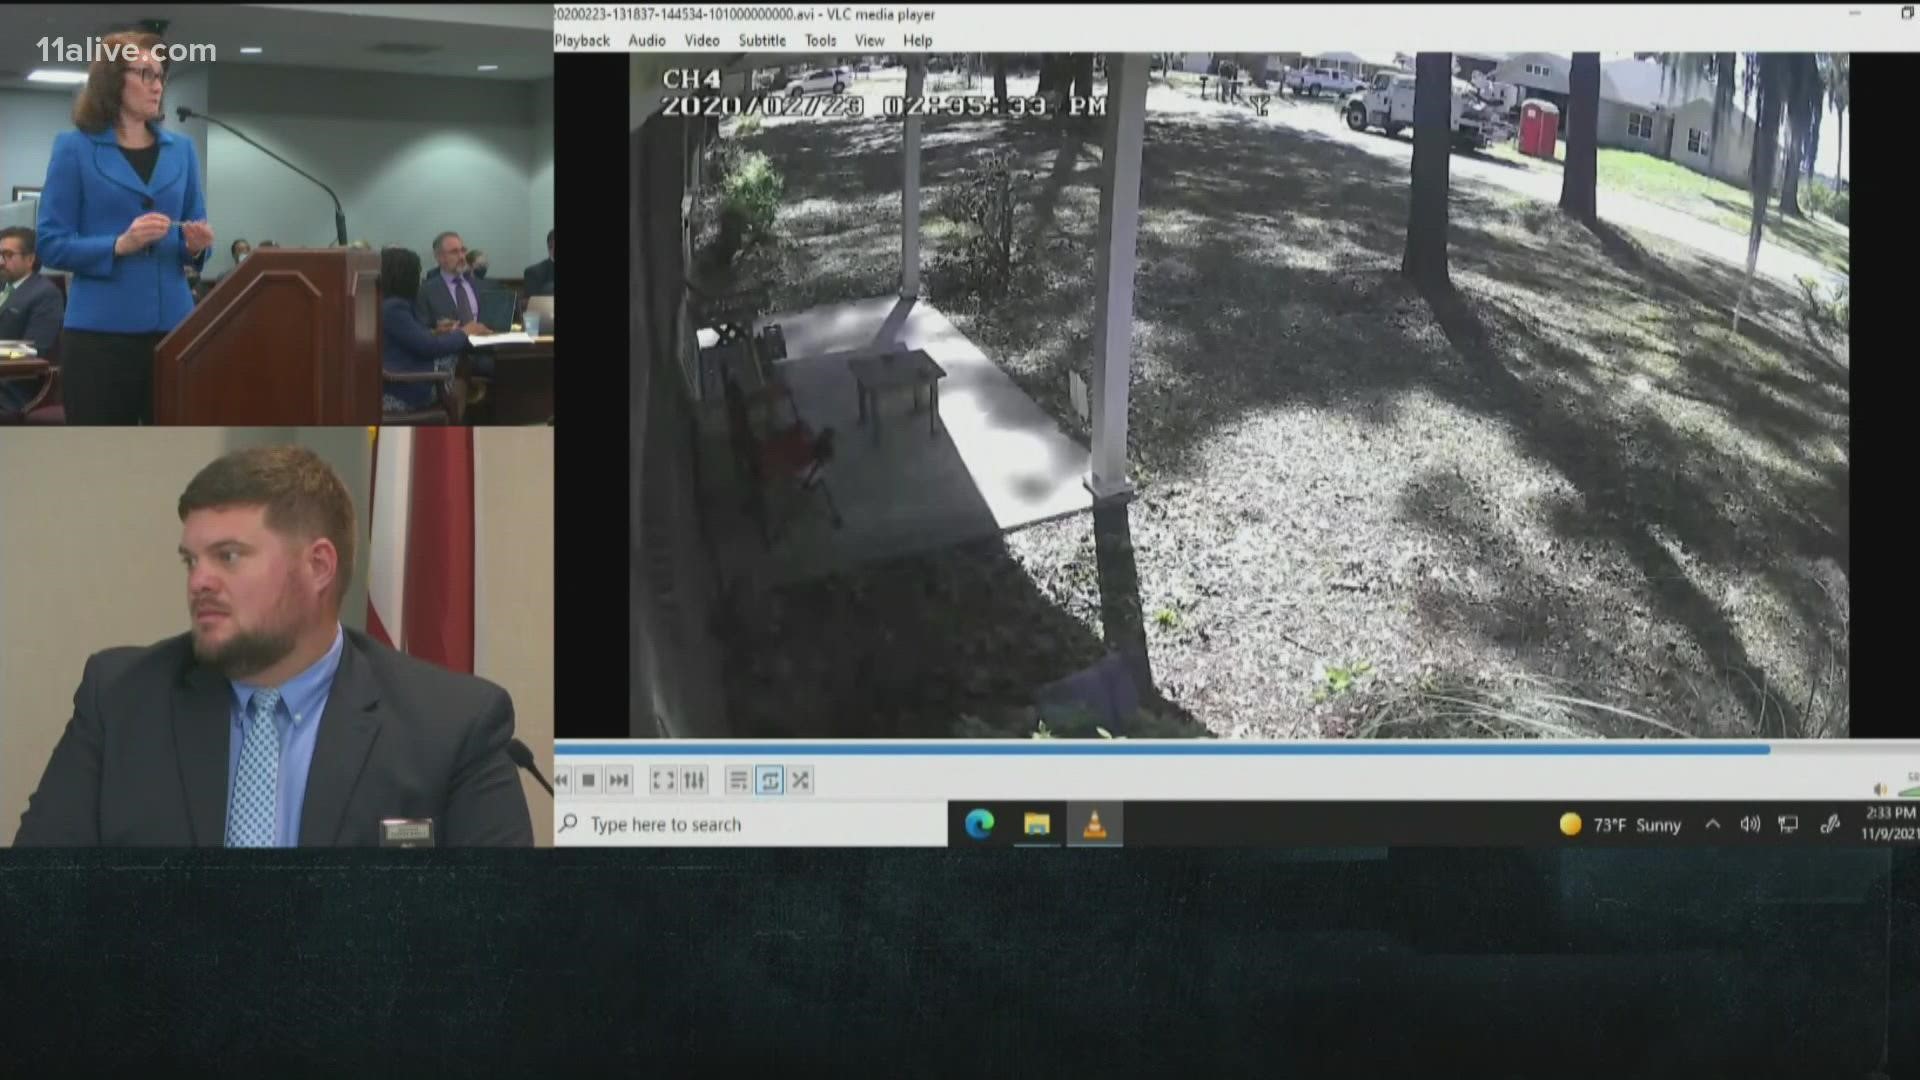 The prosecutor is asking the Glynn County police detective what the jury is seeing in the video.